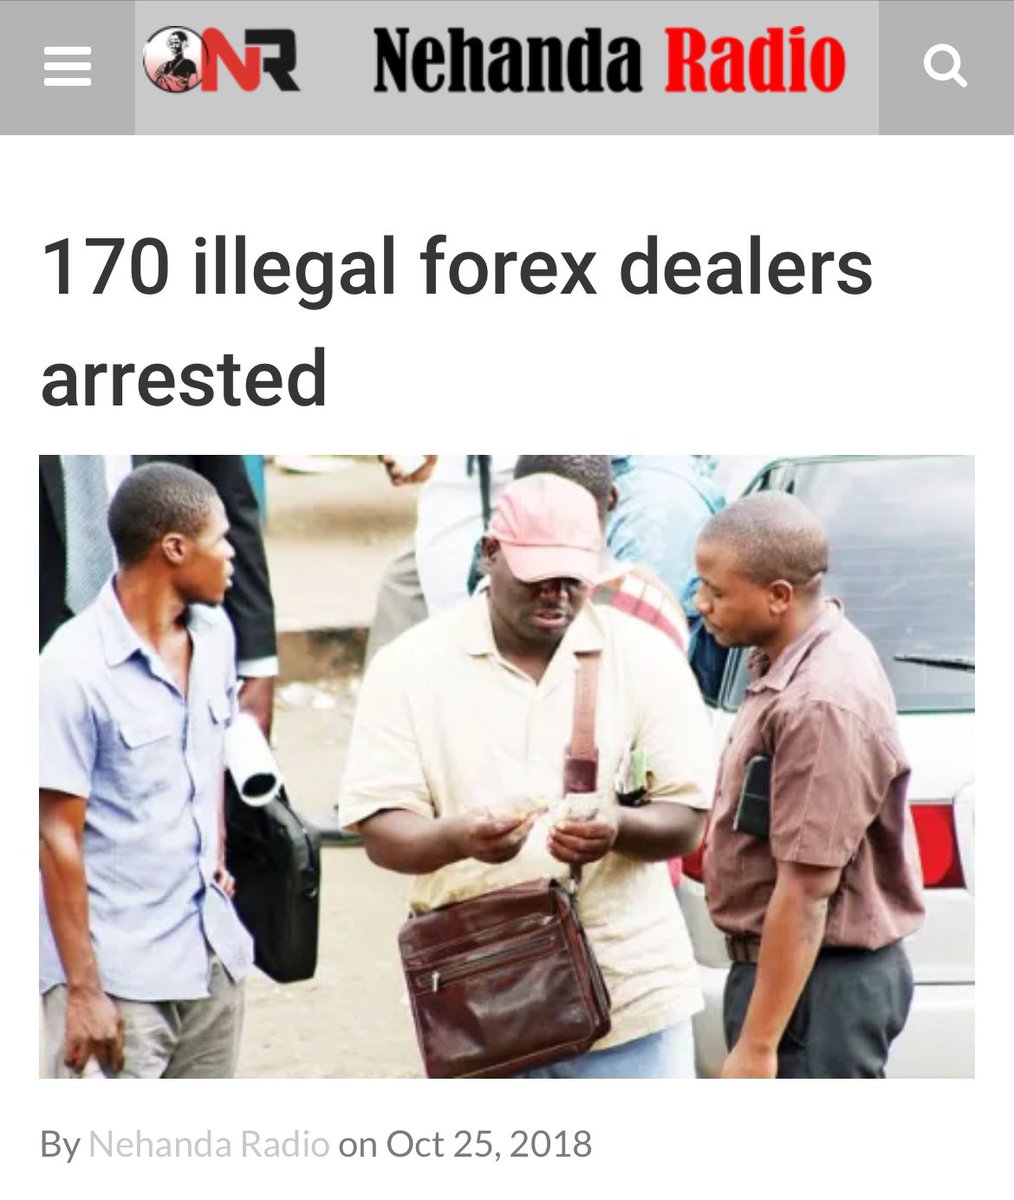 🟣You know what’s interesting? 2005: “Illegal forex dealers nabbed.” 2008: “Illegal forex dealers nabbed.” 2017: “Illegal forex dealers nabbed.” 2024: “Illegal forex dealers nabbed.” Do they ever take stock and analyze the root cause of the problems? We need new